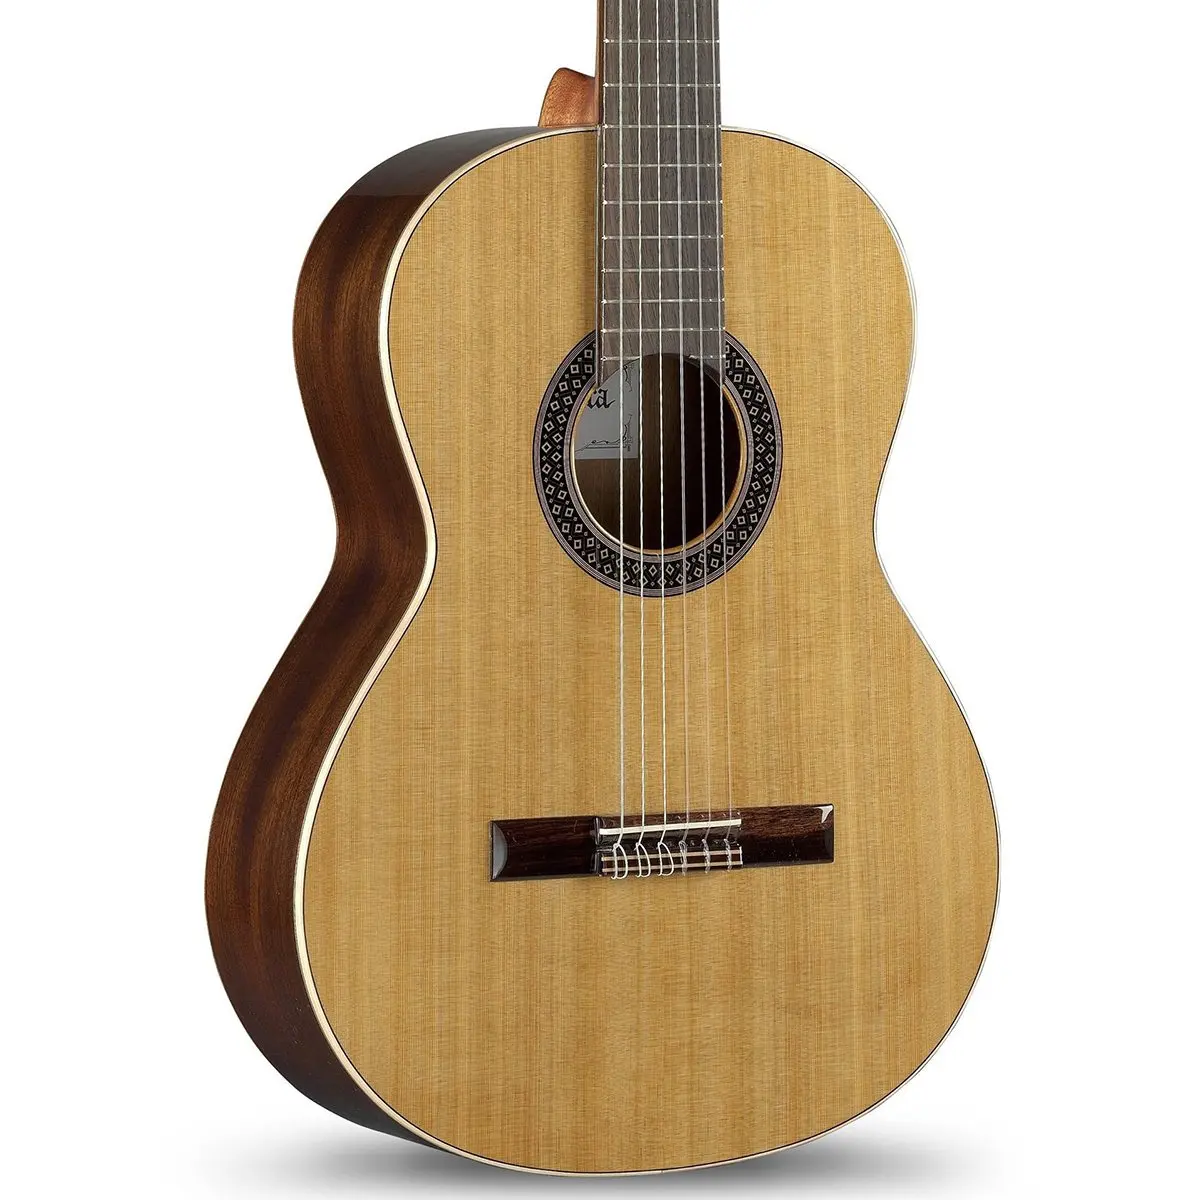 Alhambra 1C Classical Guitar Review: A Timeless Blend of Tradition and Quality